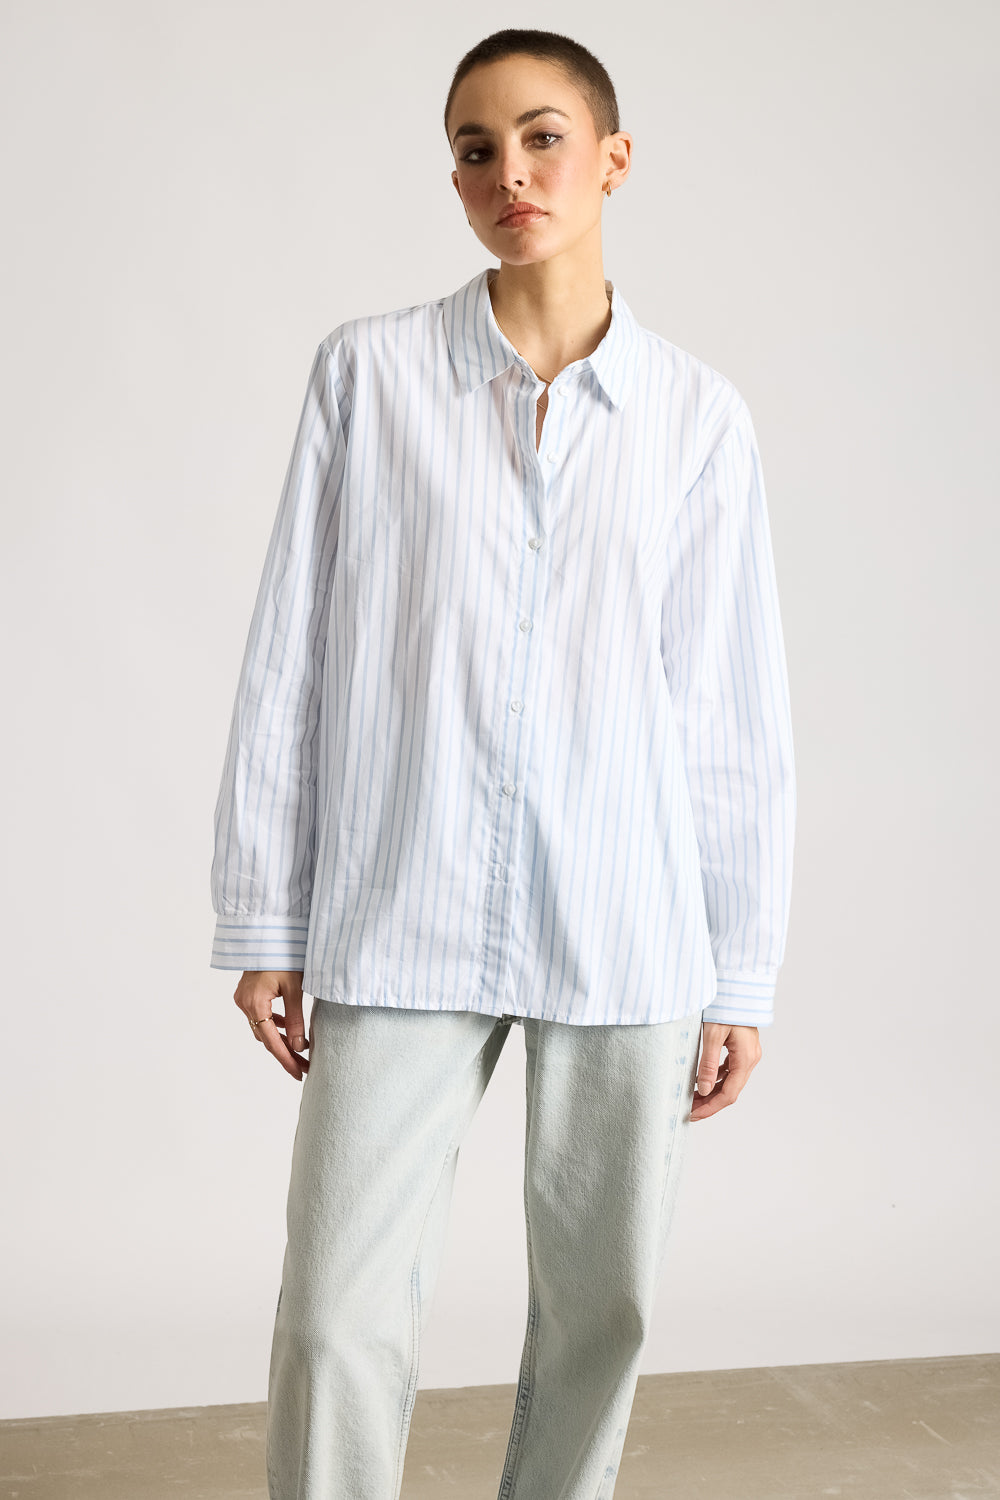 Relaxed Fit Cotton Women's White Shirt with Blue Stripes